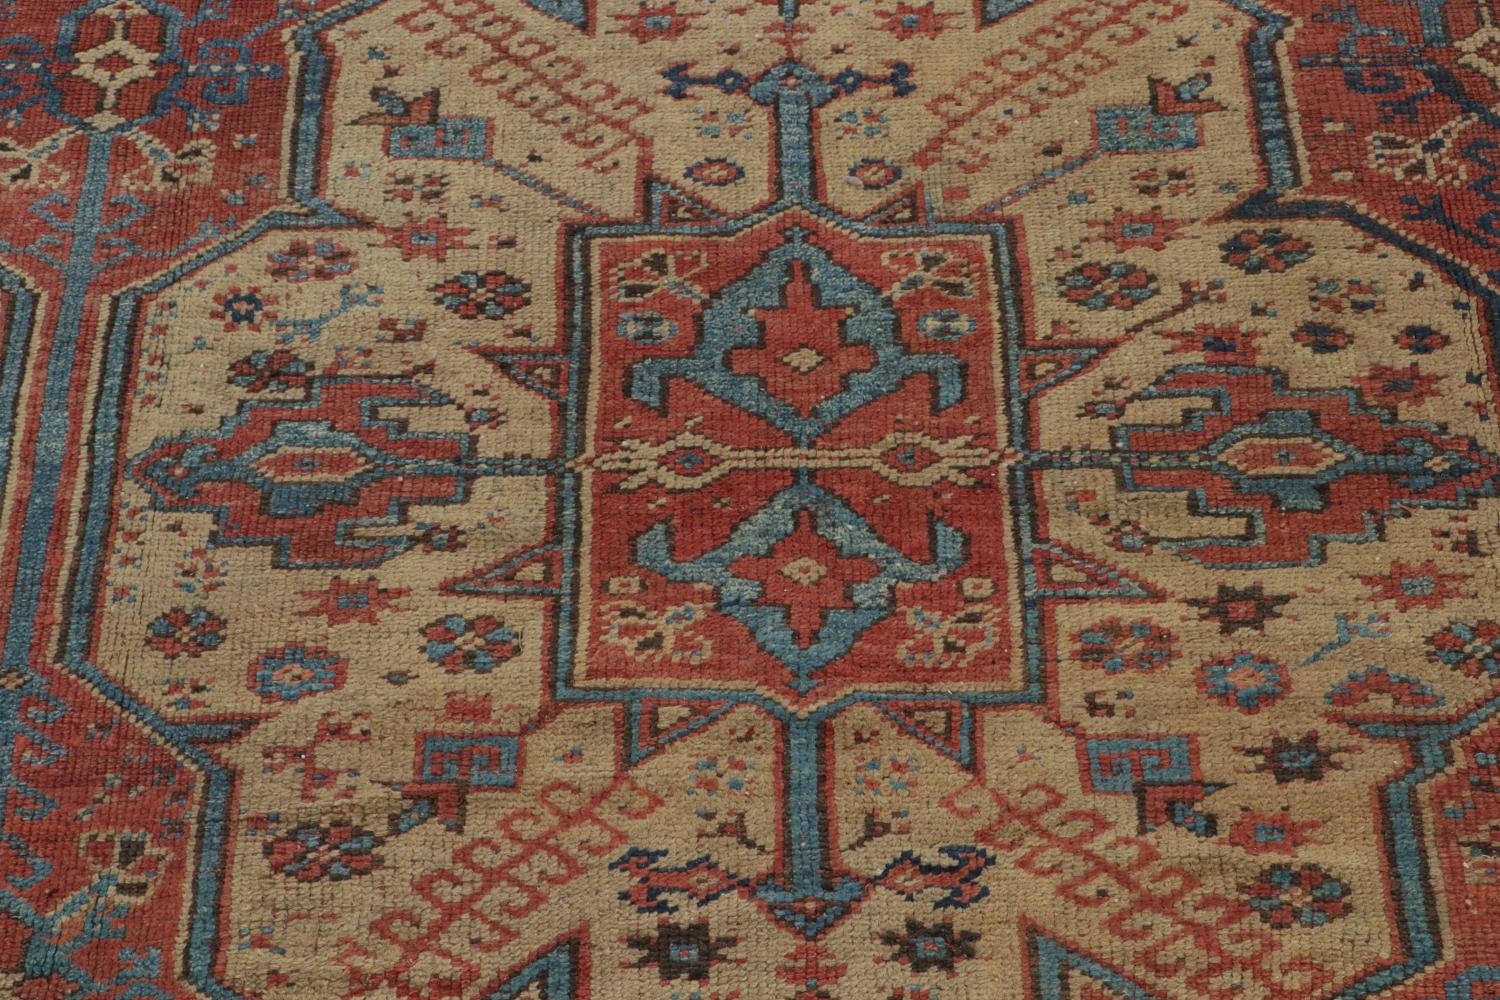 Late 19th Century Antique Oversized Oushak Rug in Red with Geometric Patterns For Sale